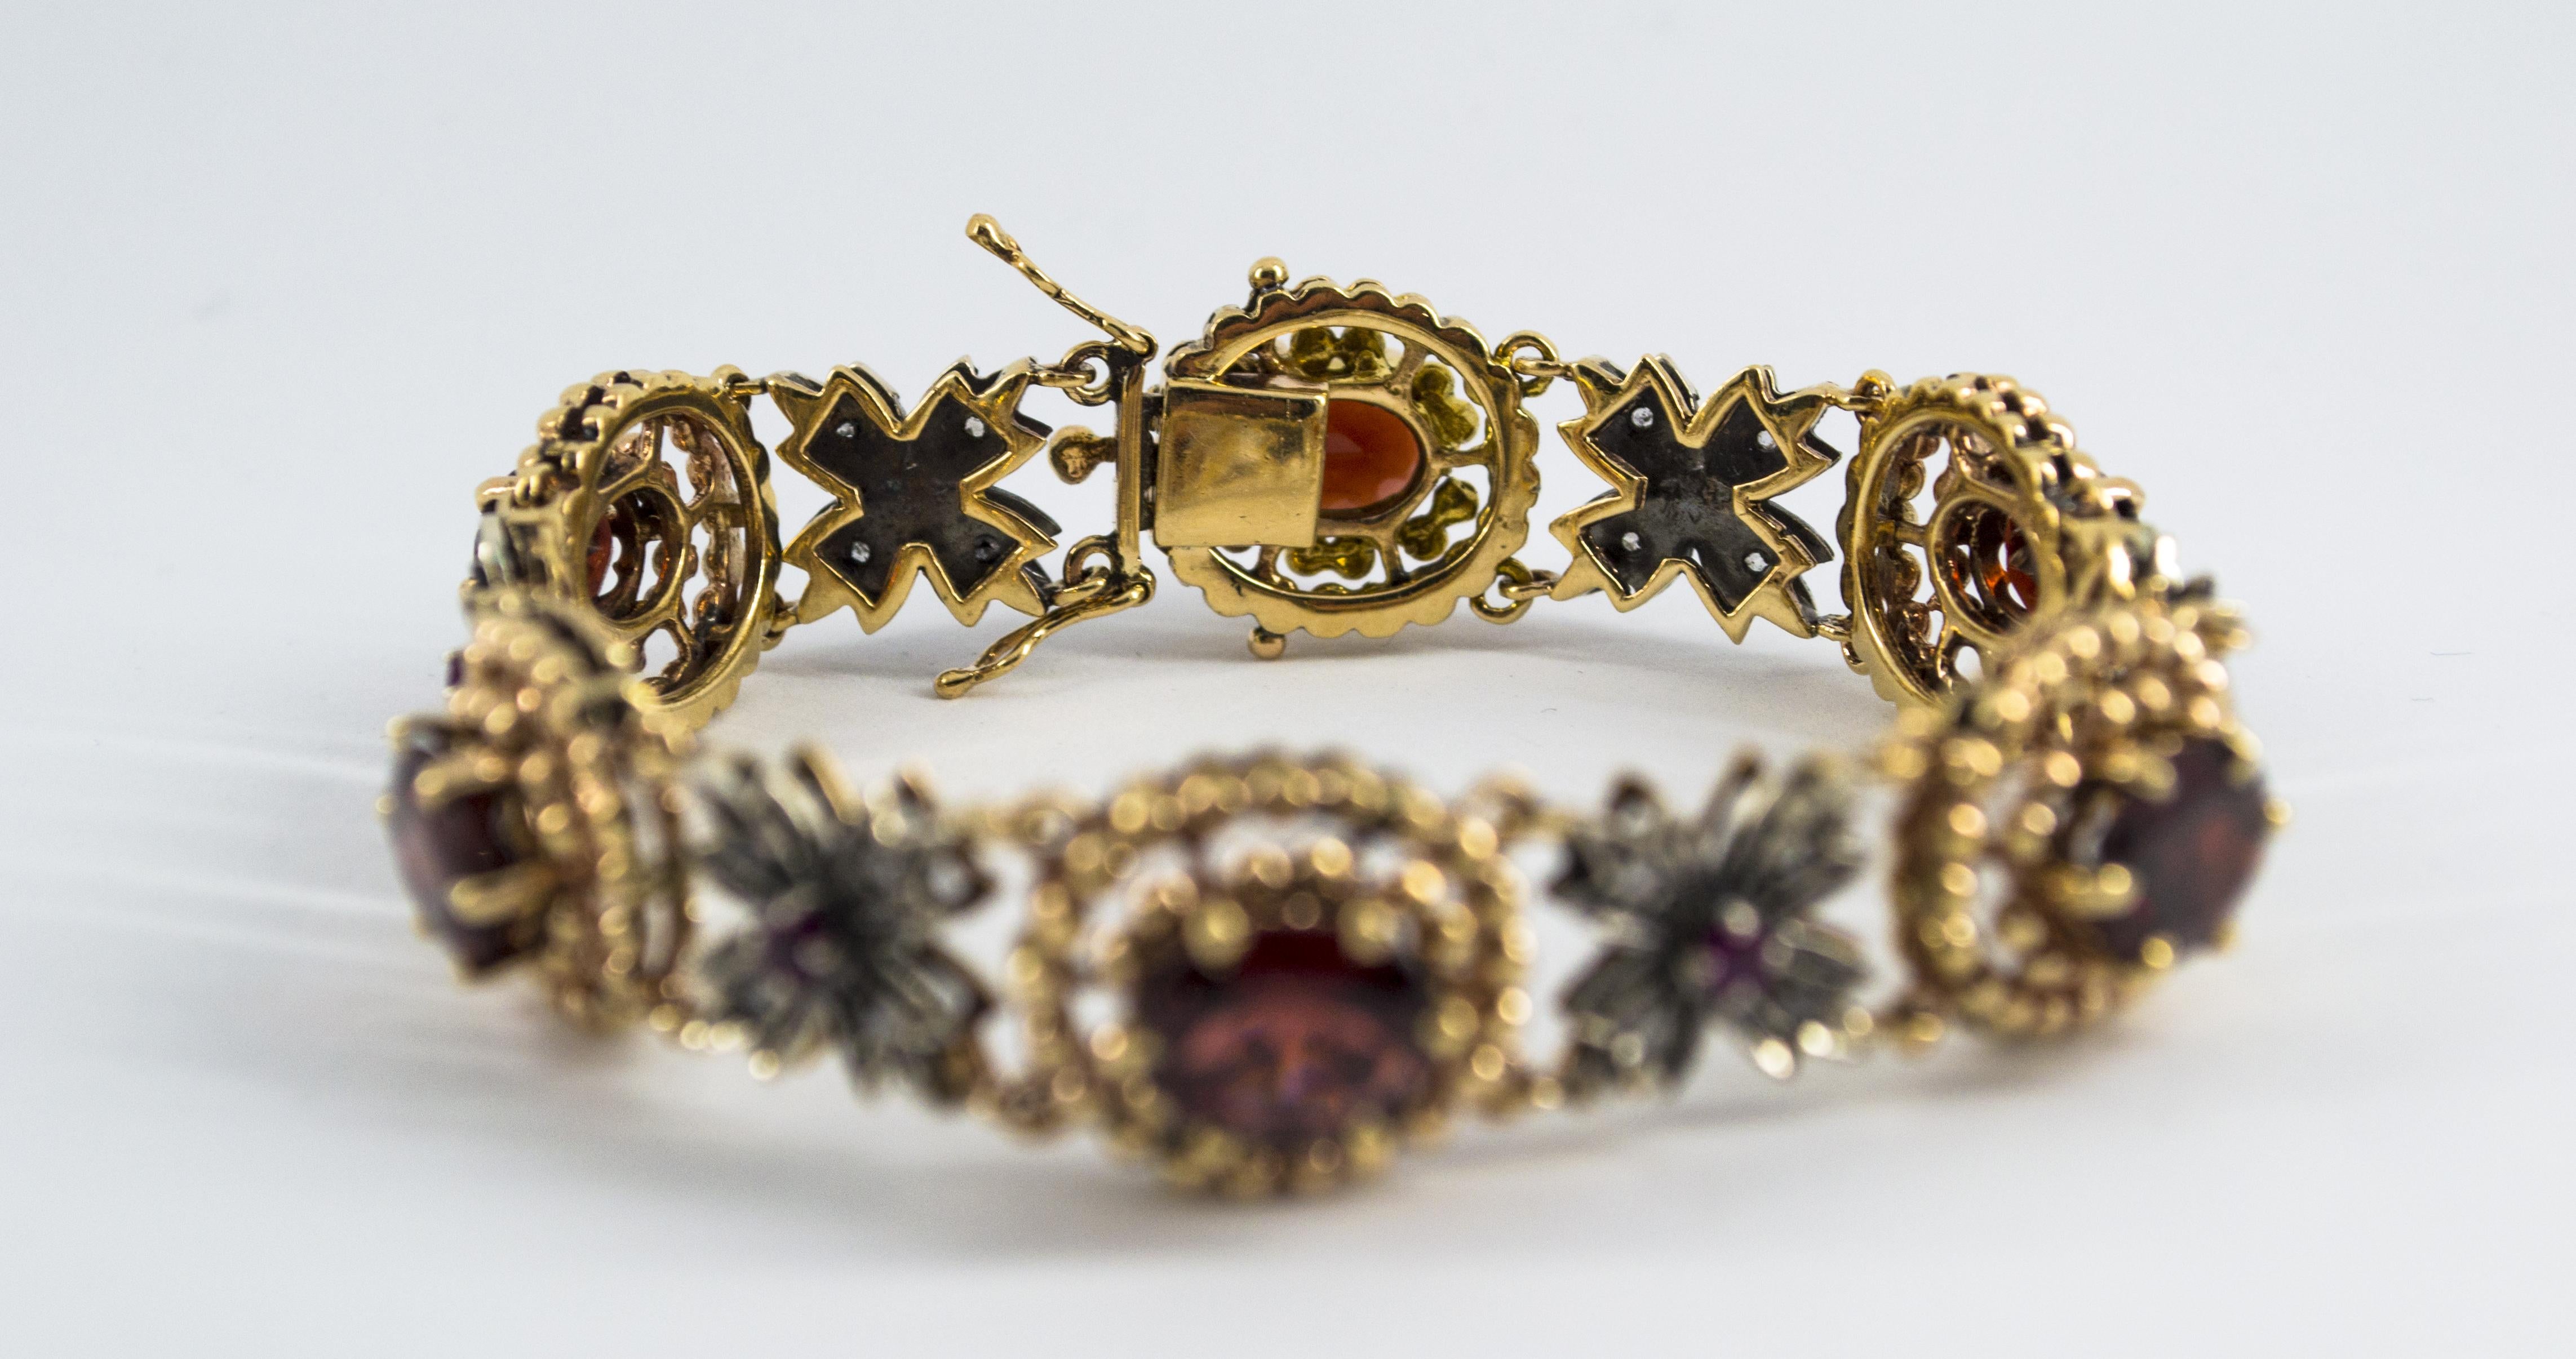 This Bracelet is made of 9K Yellow Gold and Sterling Silver.
This Bracelet has 0.75 Carats of White Diamonds.
This Bracelet has 0.43 Carats of Rubies.
This Bracelet has 20.00 Carats of Garnet.
We're a workshop so every piece is handmade,